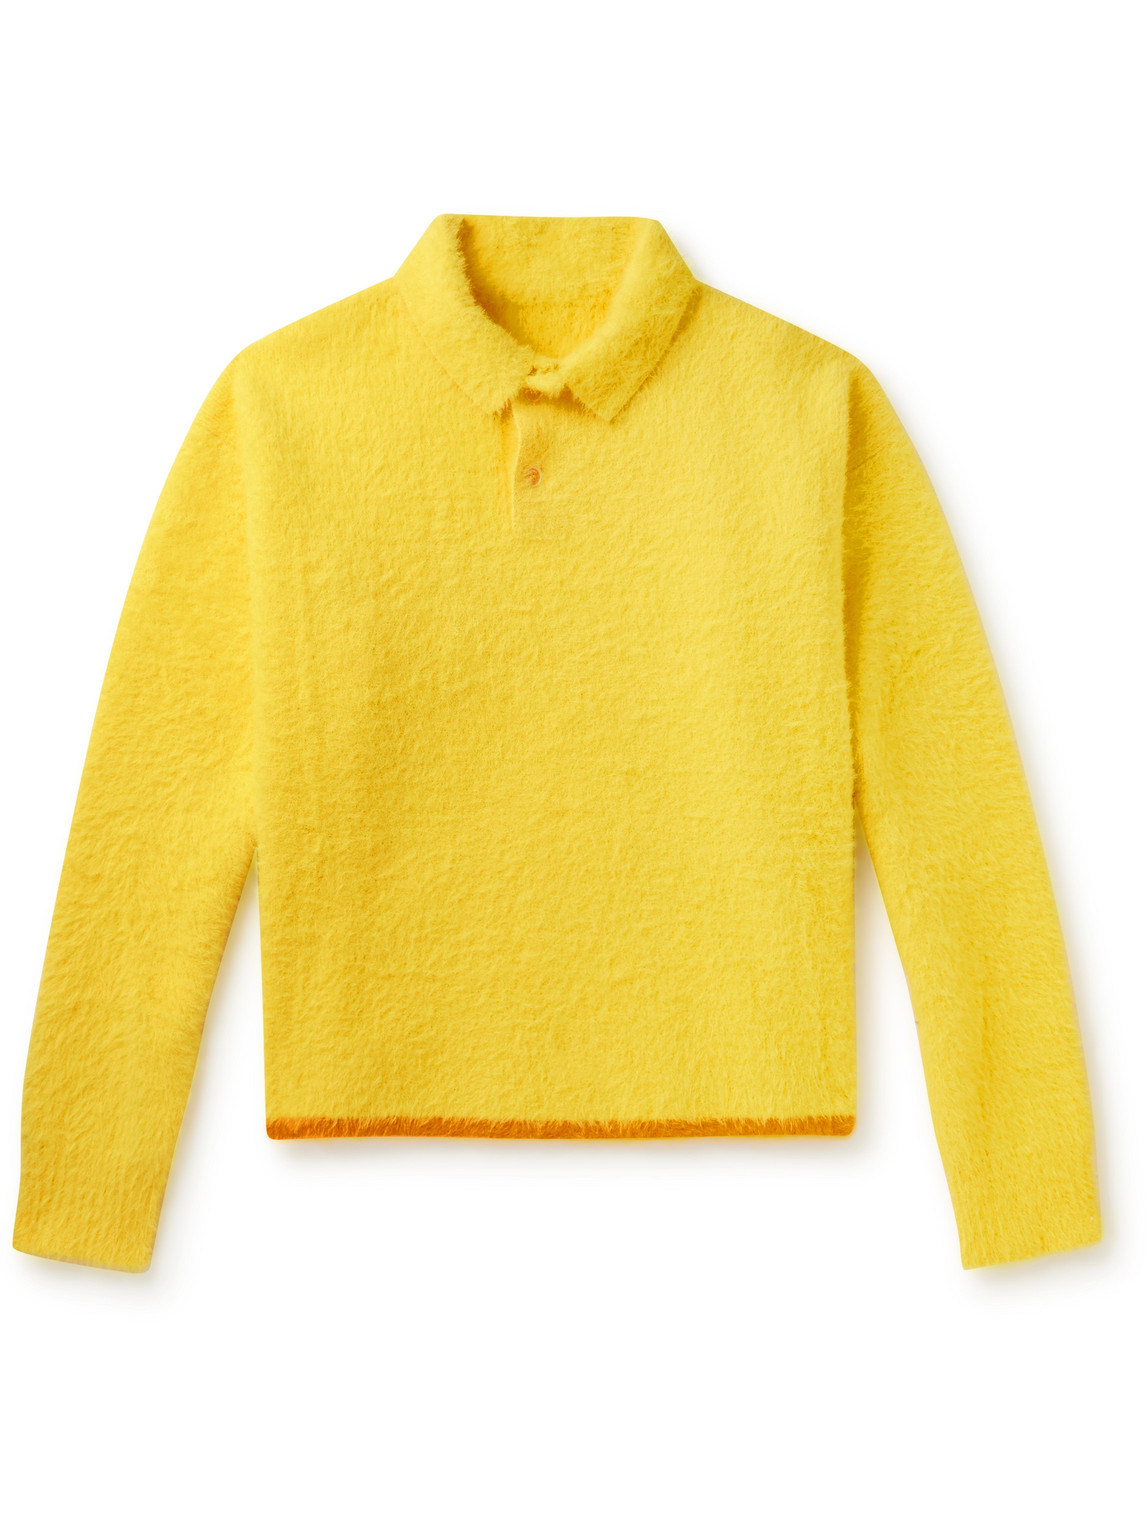 JACQUEMUS POLO NEVE BRUSHED-KNIT SWEATER